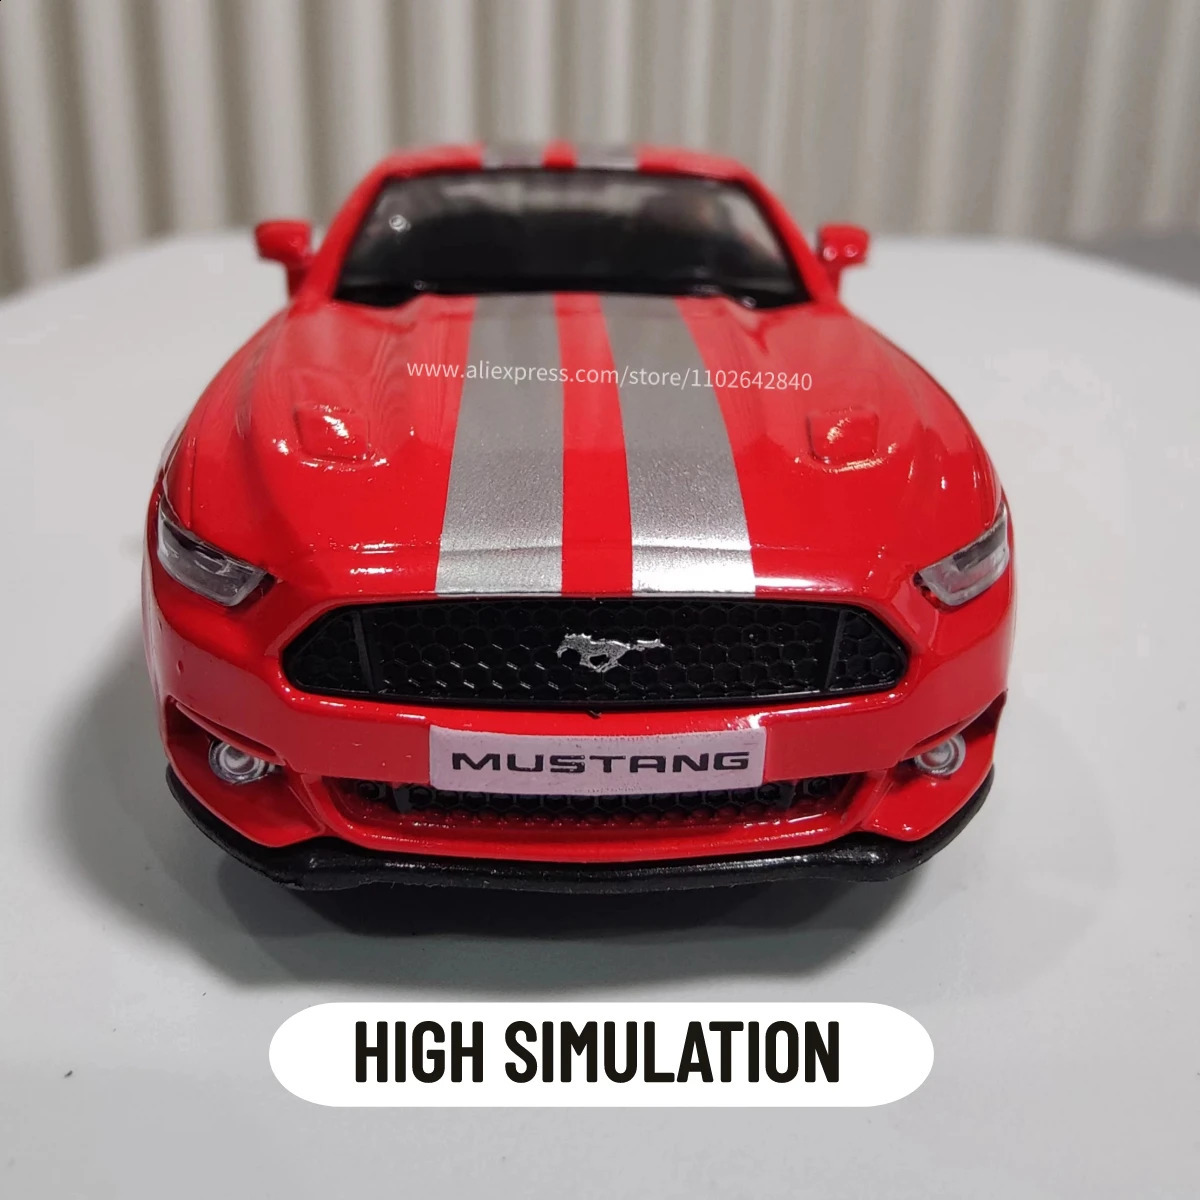 Electric RC Car 1 36 Metal Diecast Model Repilca Ford Mustang Scale Miniature Collection Vehicle Hobby Kid Toy for Boy Xmas Gift 231218